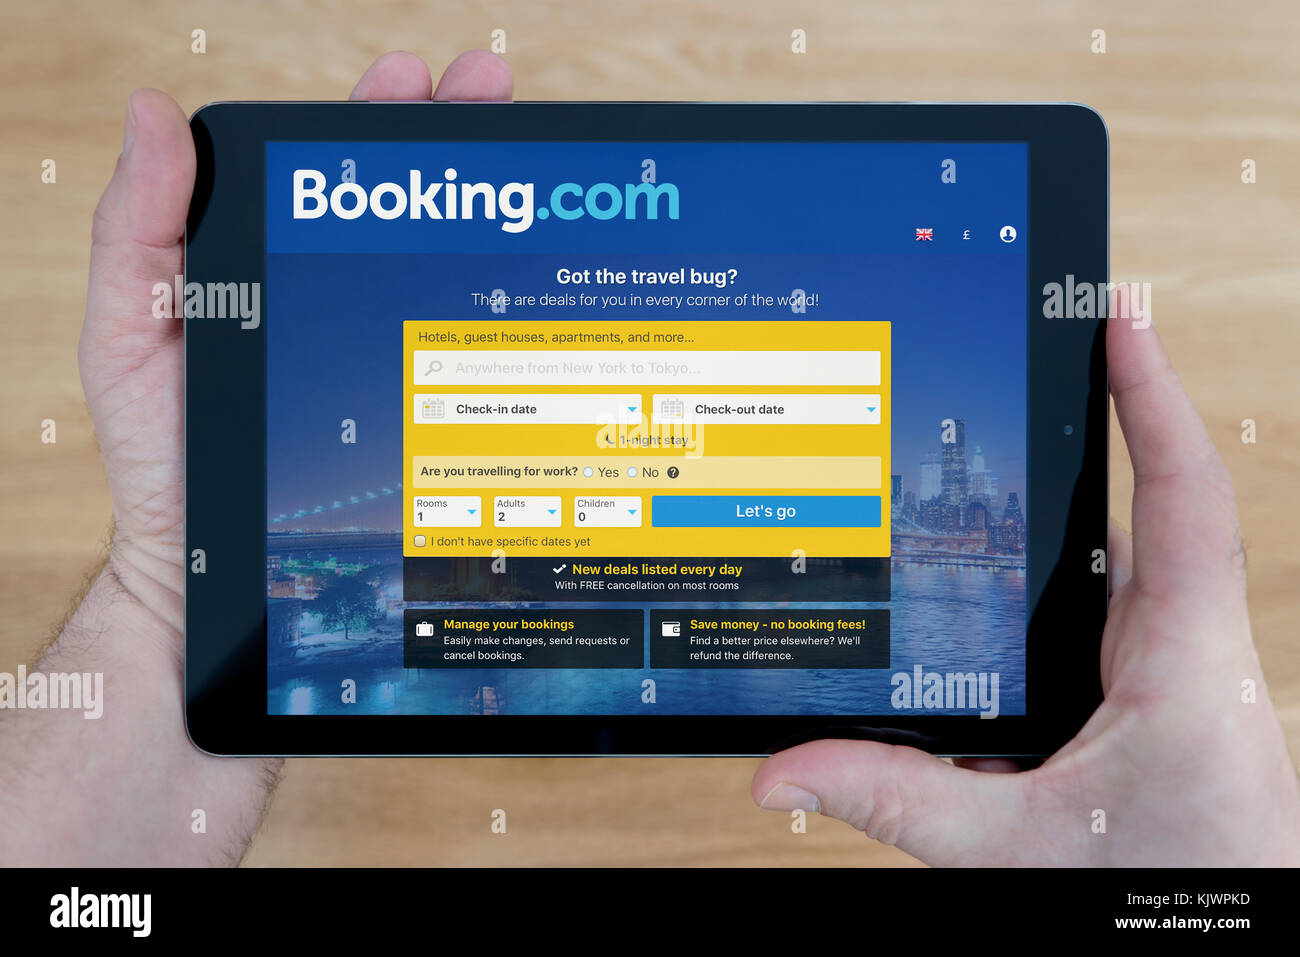 A man looks at the Booking.com website on his iPad tablet device, shot against a wooden table top background (Editorial use only) Stock Photo